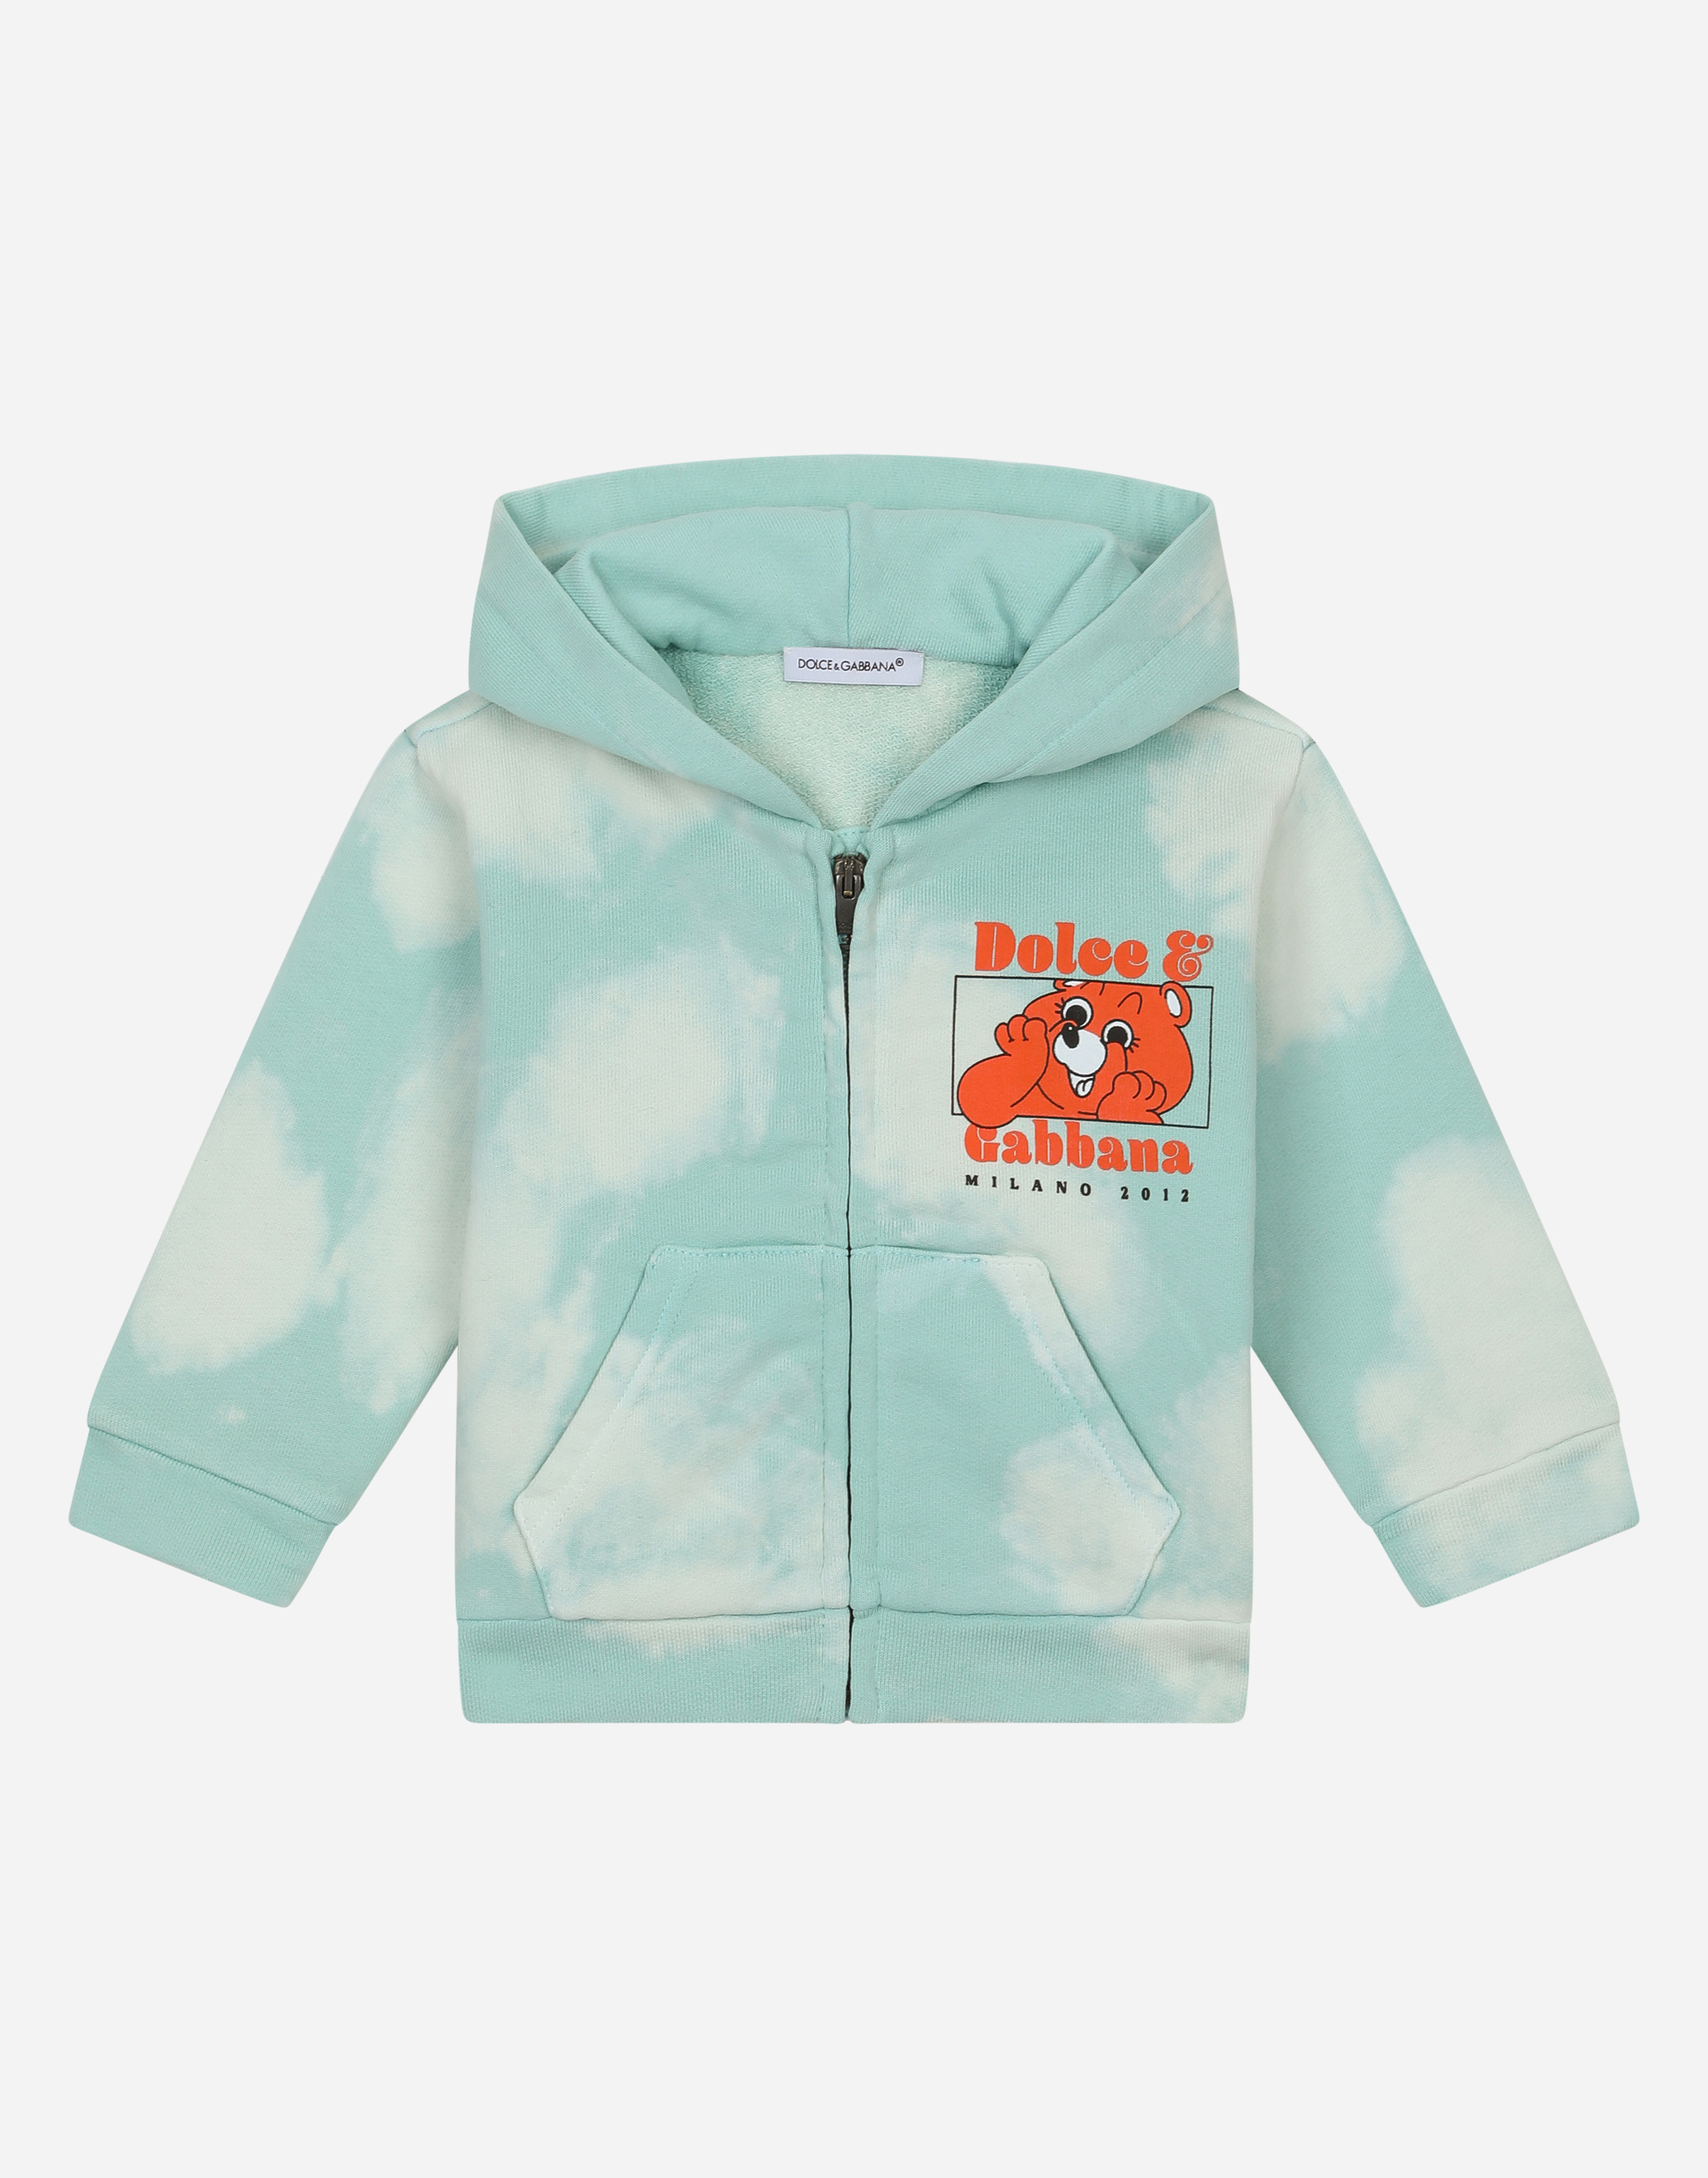 DOLCE & GABBANA JERSEY HOODIE WITH CLOUD PRINT